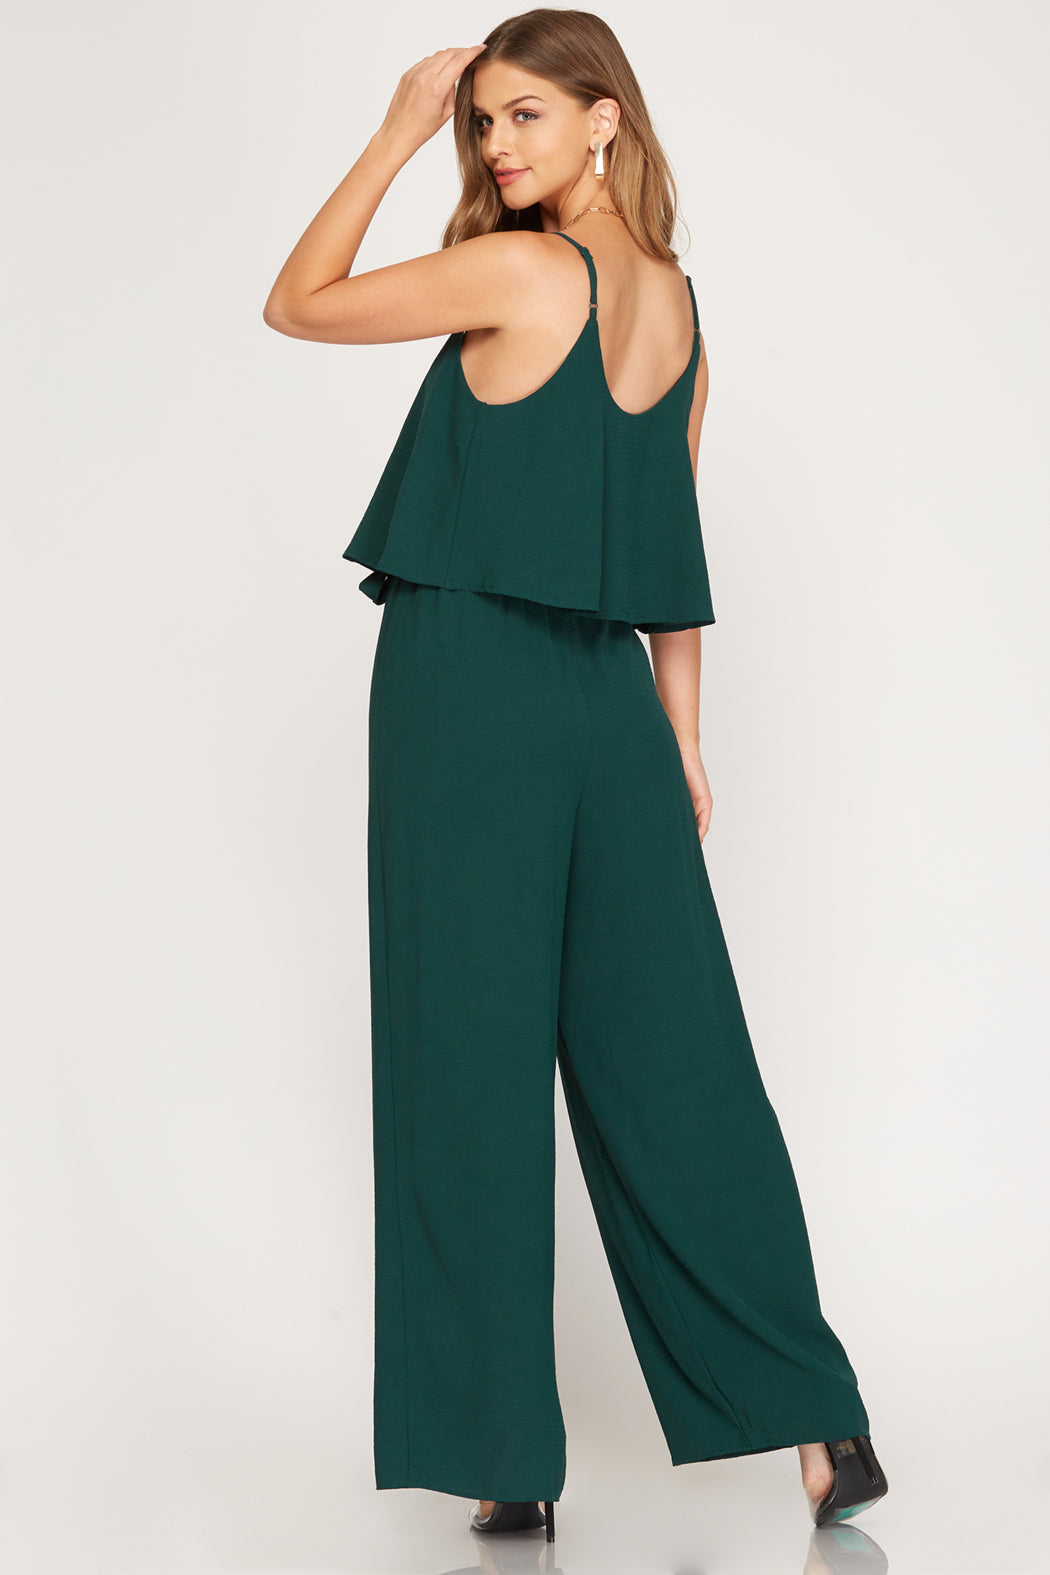 Green Woven Cami Overlay Jumpsuit